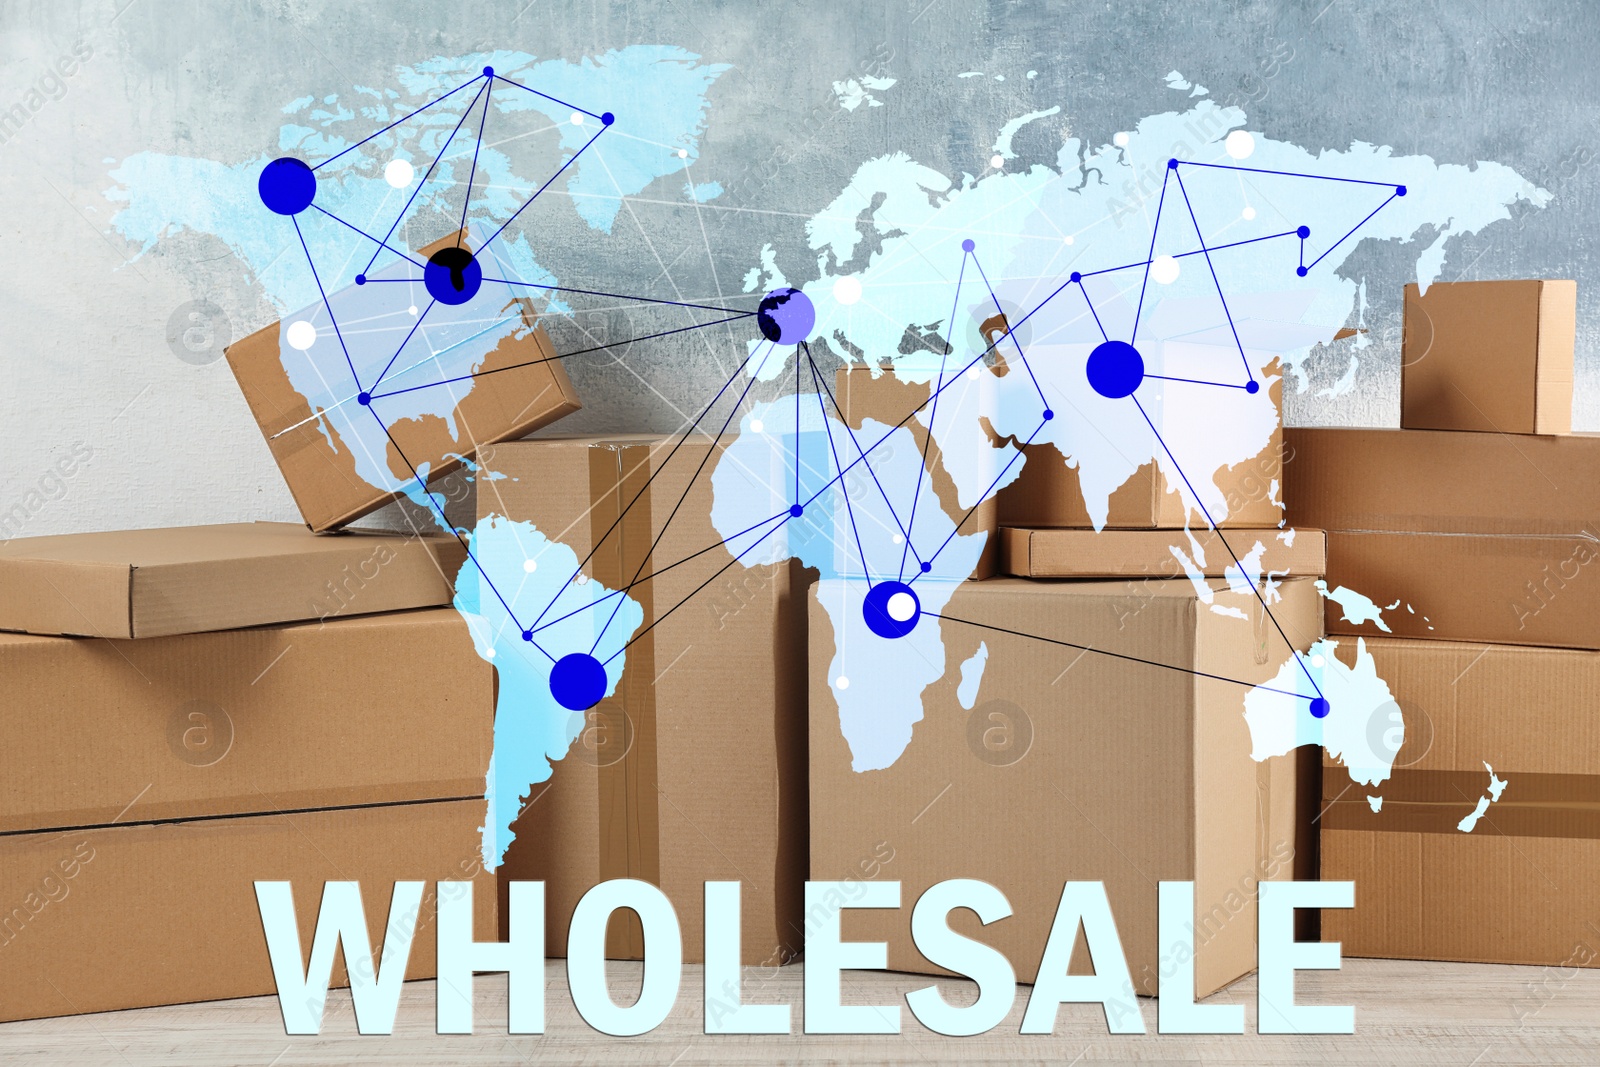 Image of Wholesale business. World map and blurred parcel boxes on background